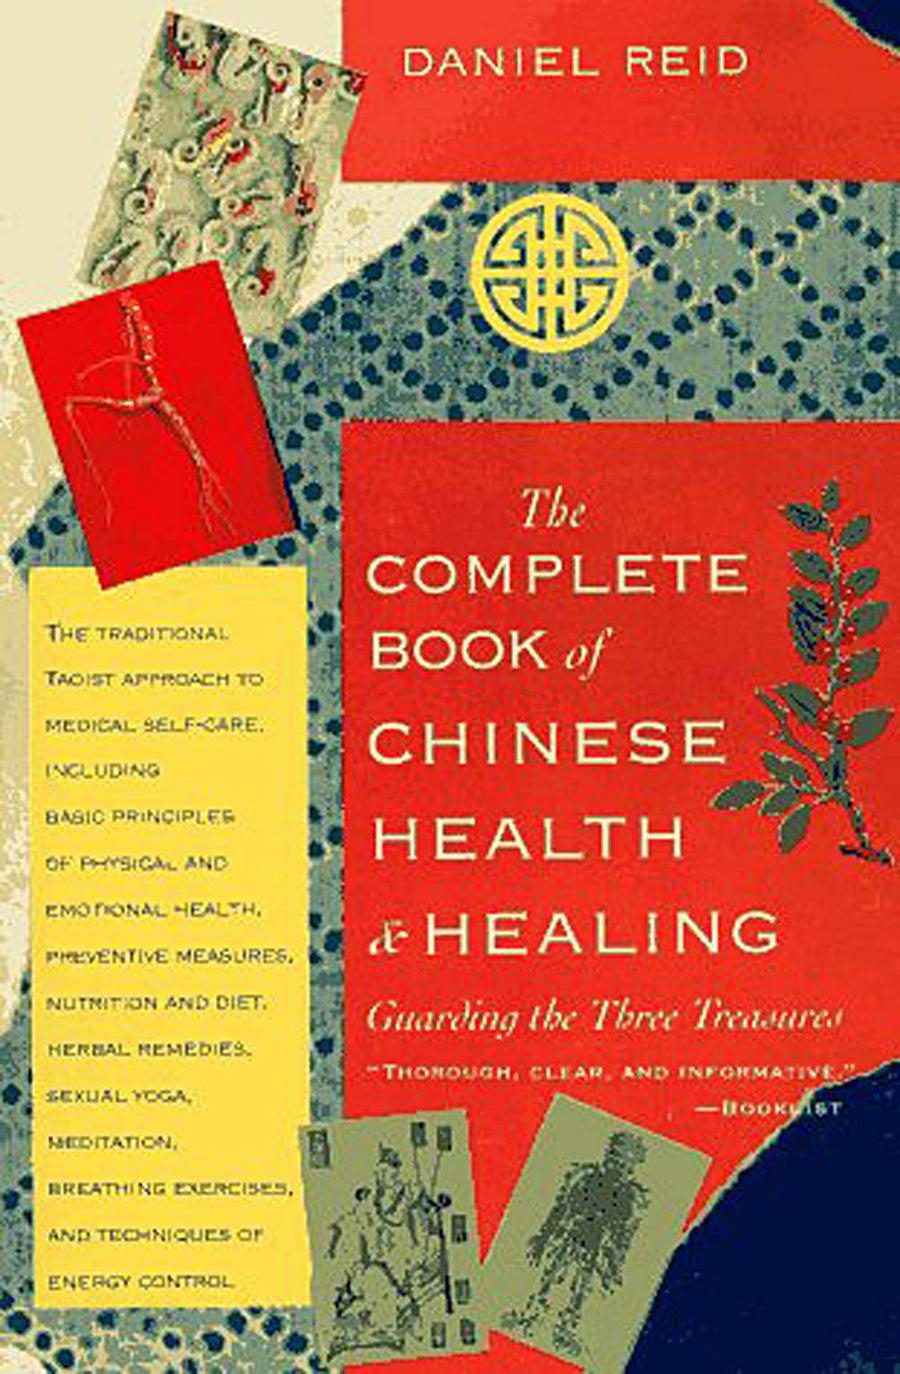 The Complete Book of Chinese Health & Healing